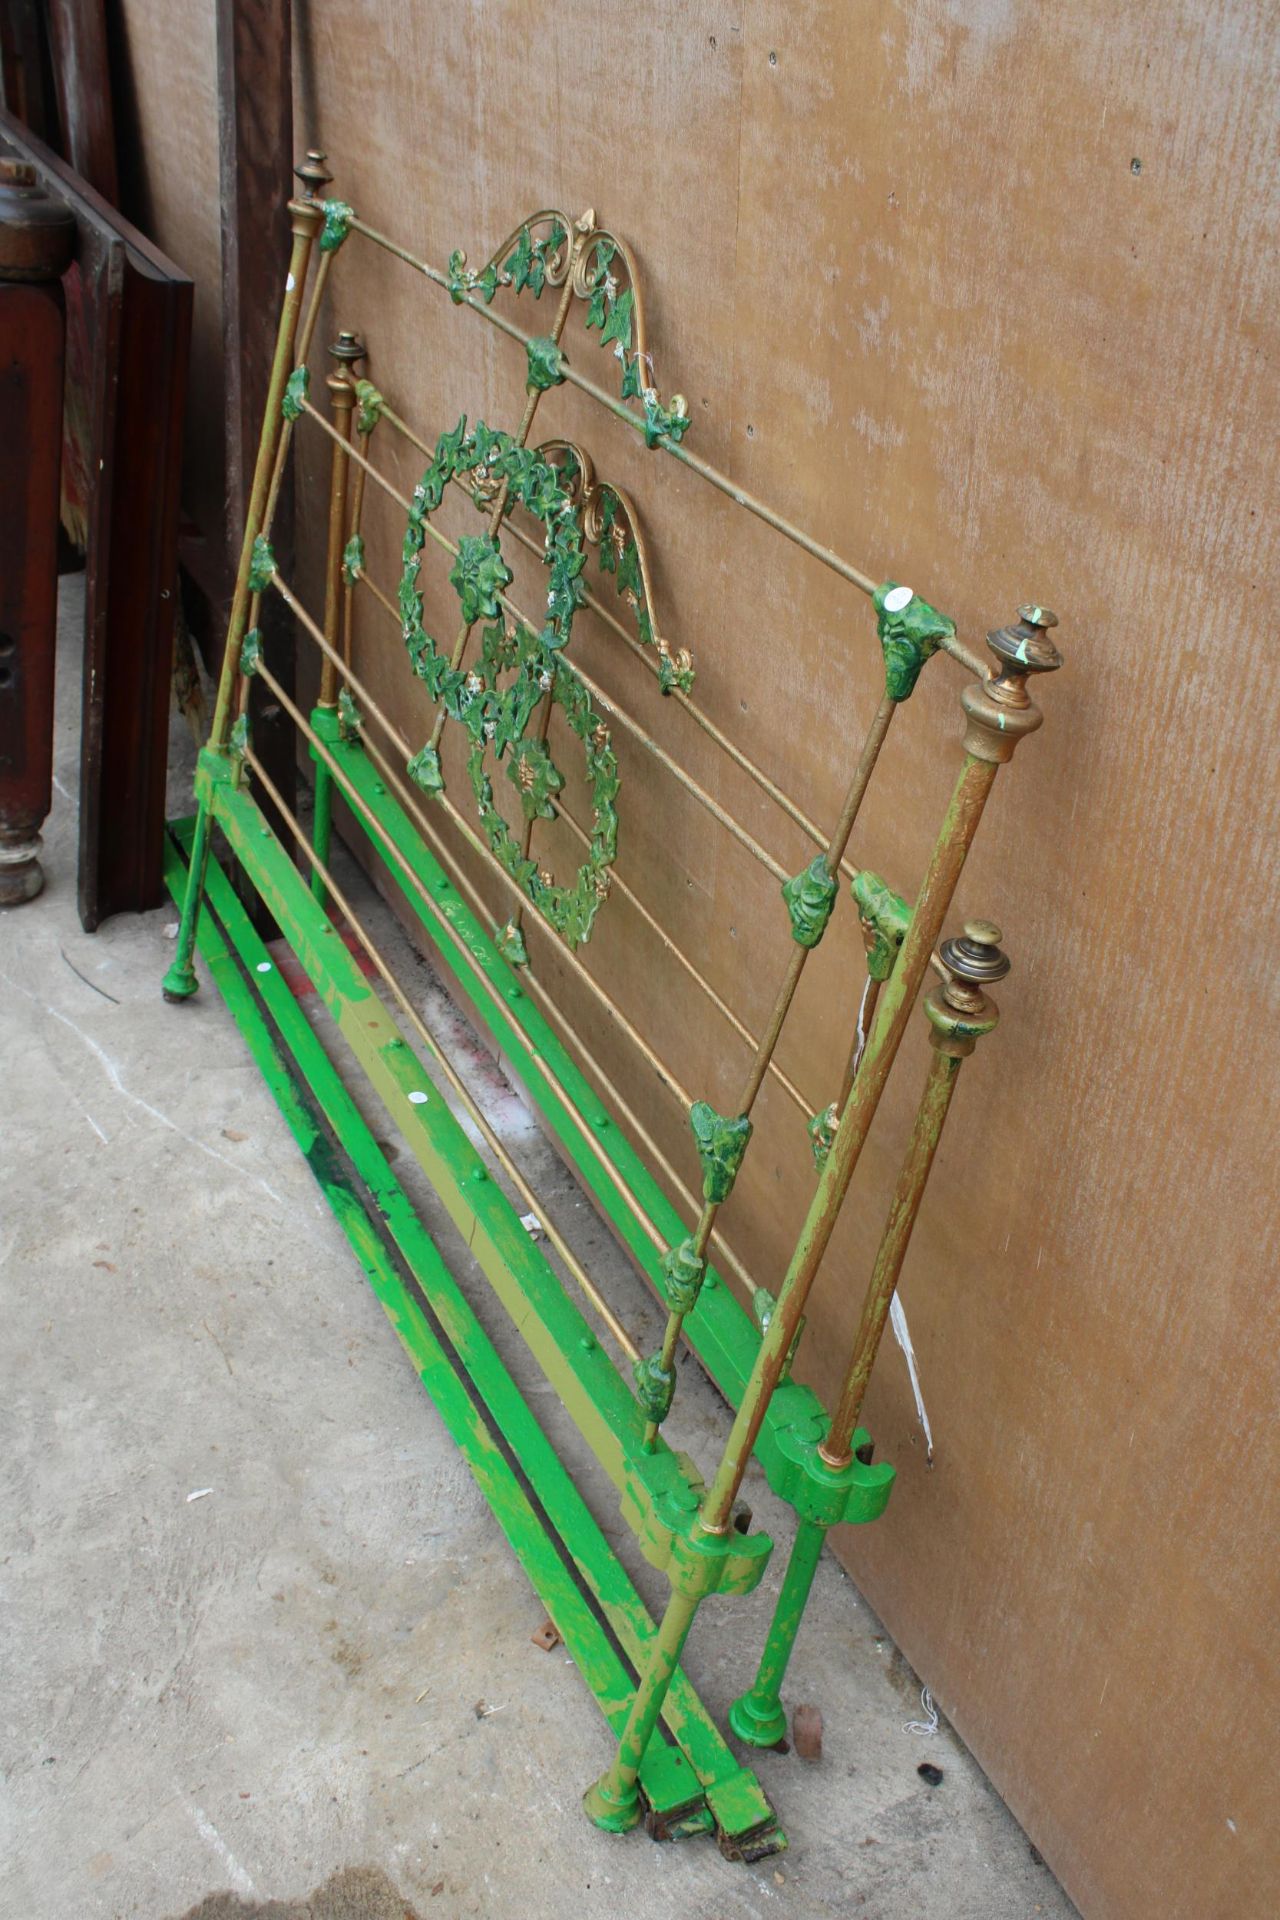 A BRASS AND IRON 4'6" BEDSTEAD DECORATED WITH LEAVES - Image 2 of 3